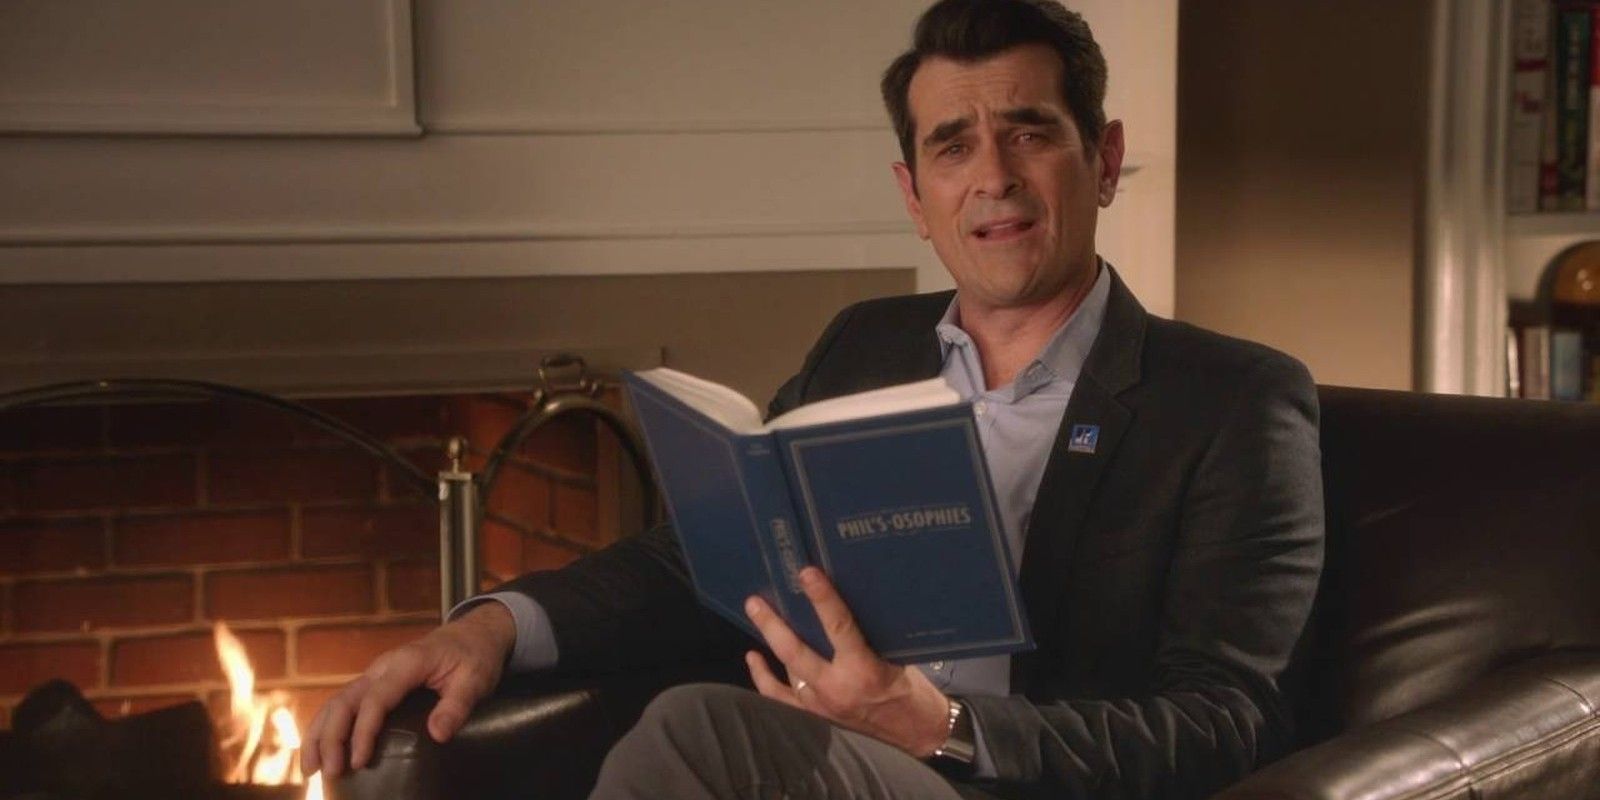 Phil Dunphy from Modern Family sitting on a chair reading a book.